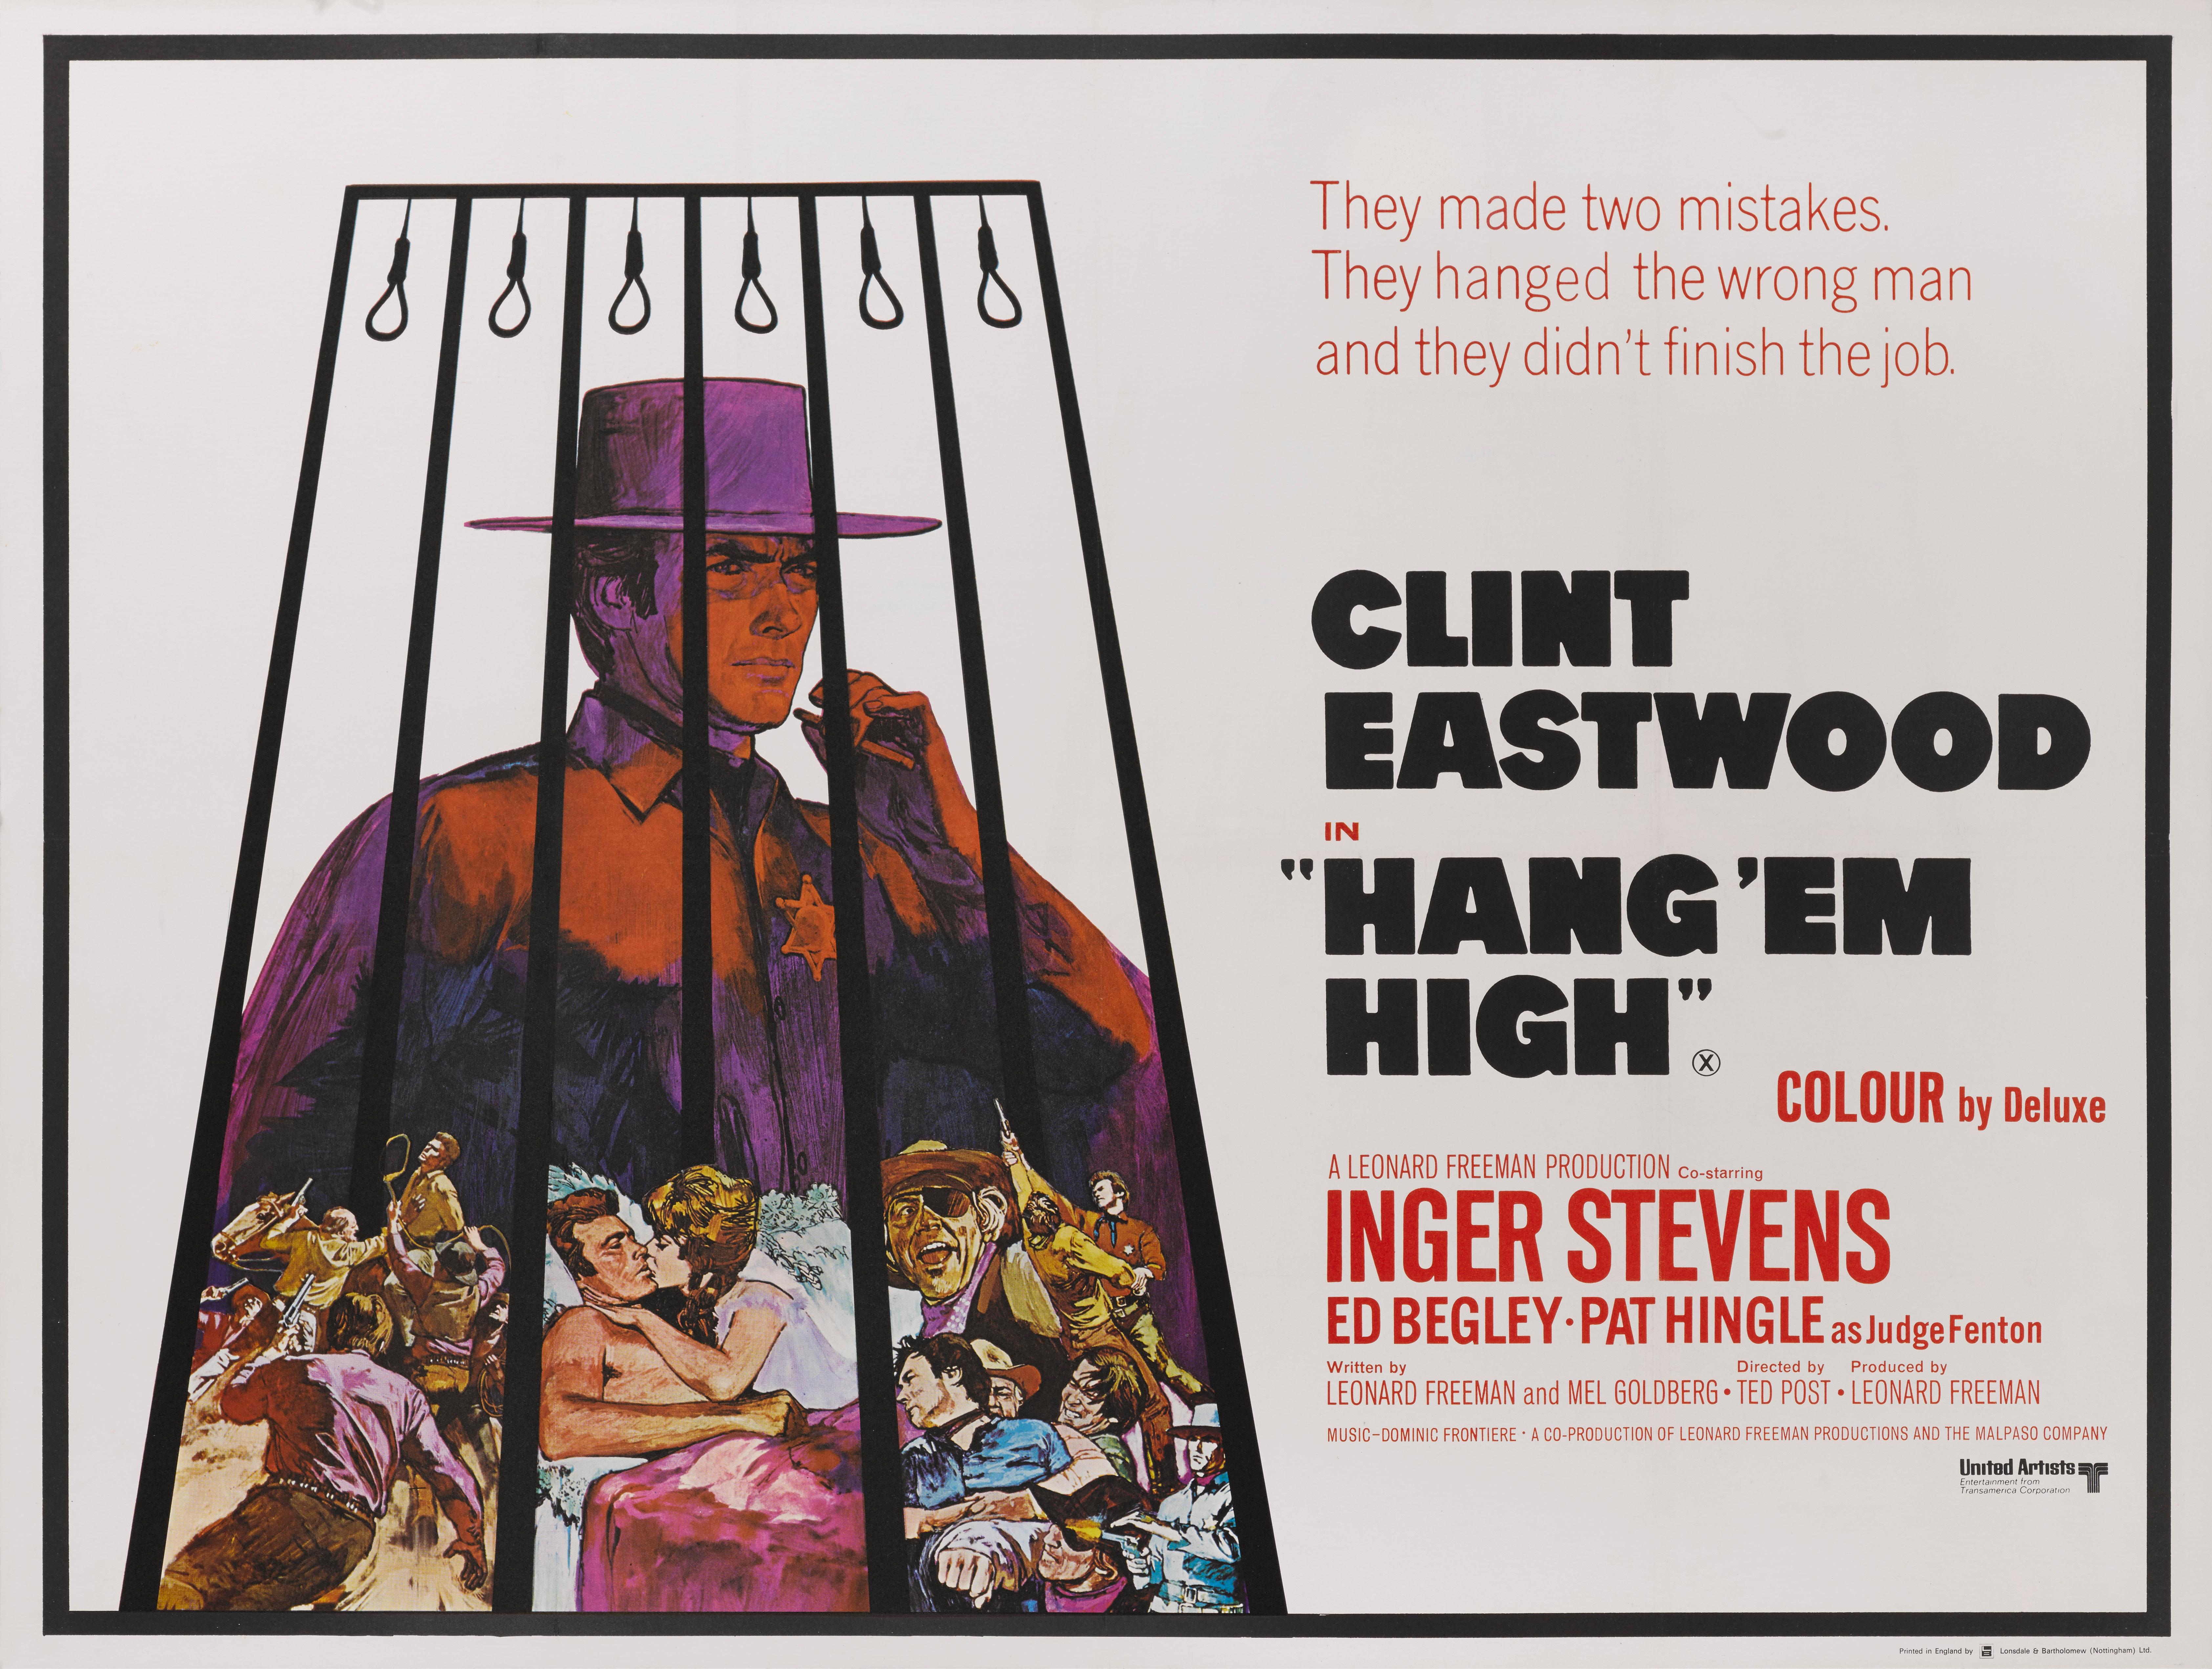 Original British film poster for the the 1967 Western directed by Ted Post and starring Clint Eastwood. This poster is conservation line backed and would be shipped rolled in a strong tube.